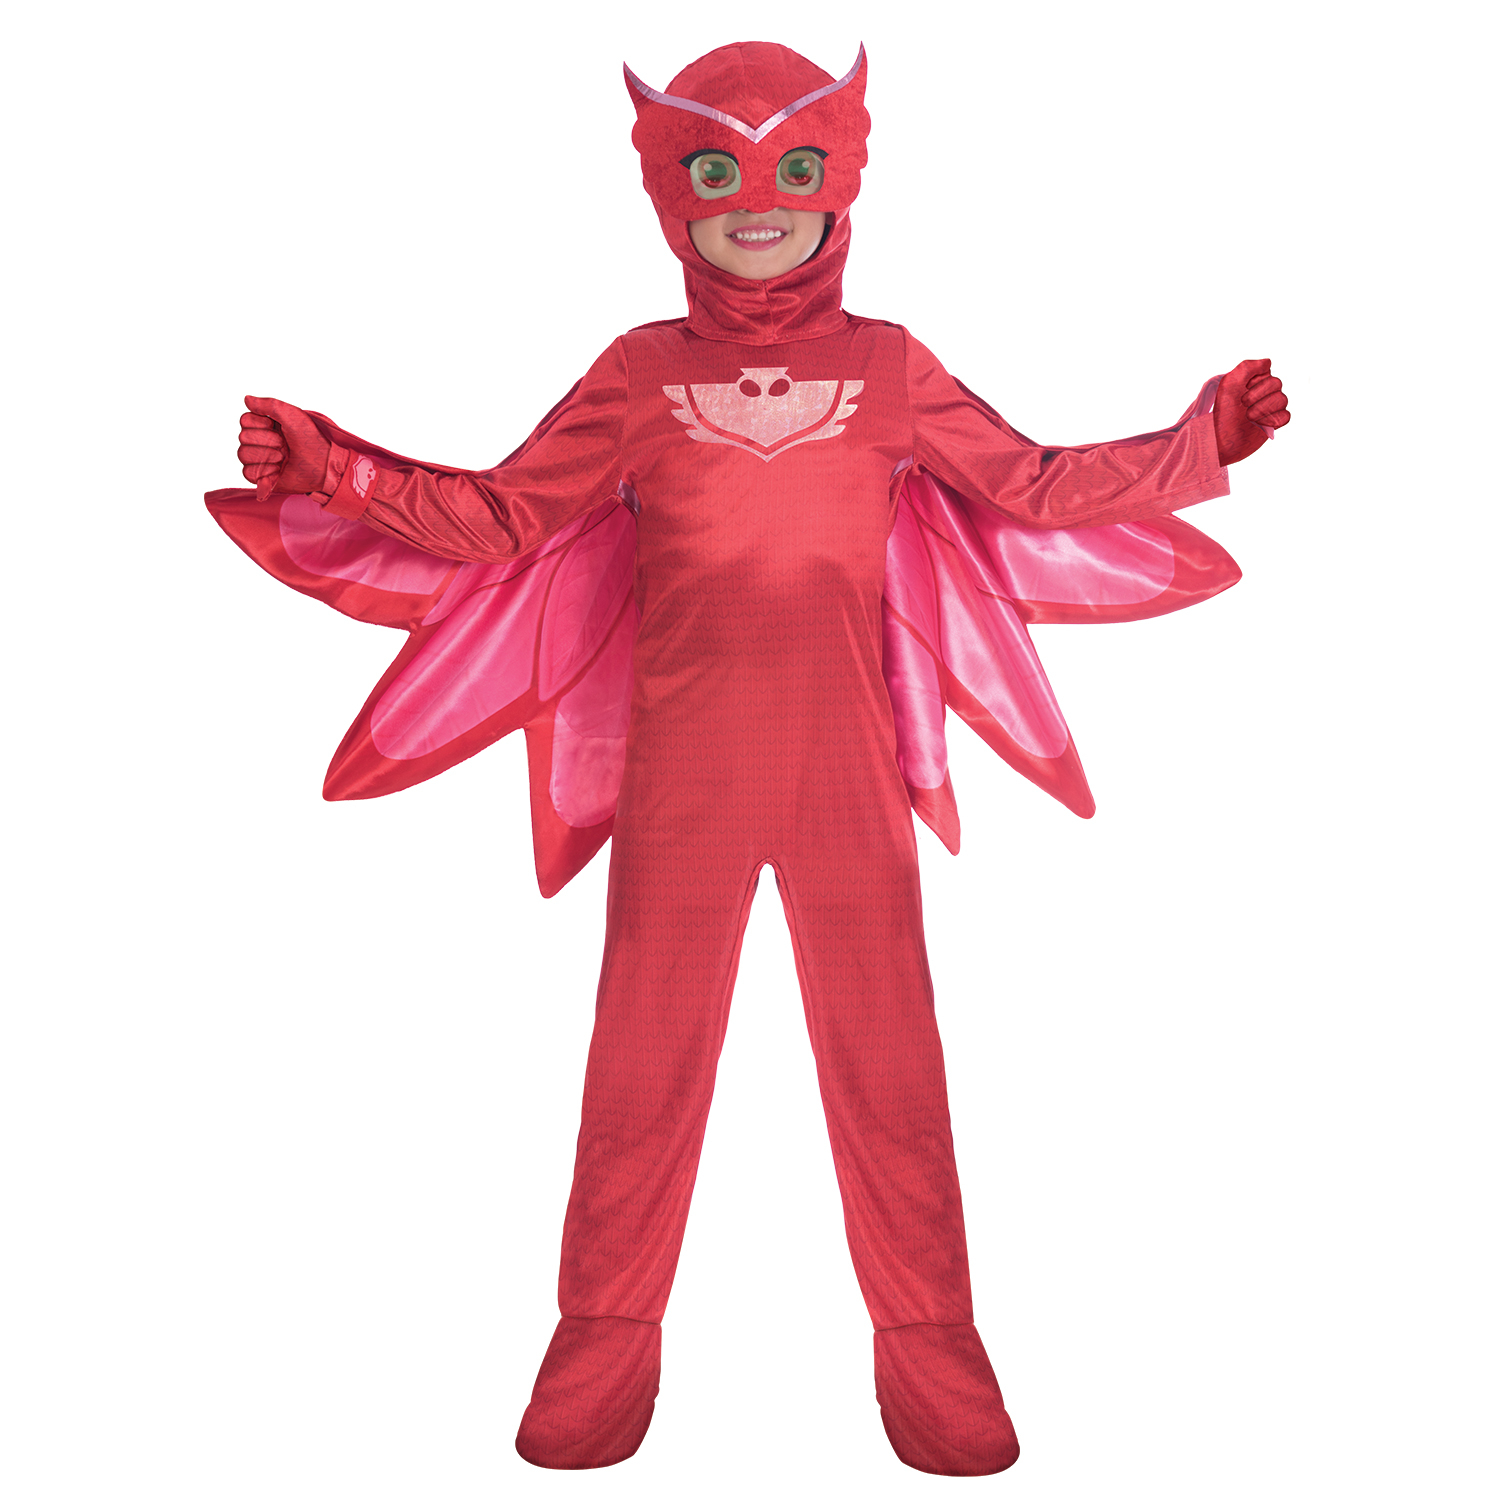 PJ Masks Owlette Deluxe Costume - Age 5-6 Years - 1 PC : Amscan ...